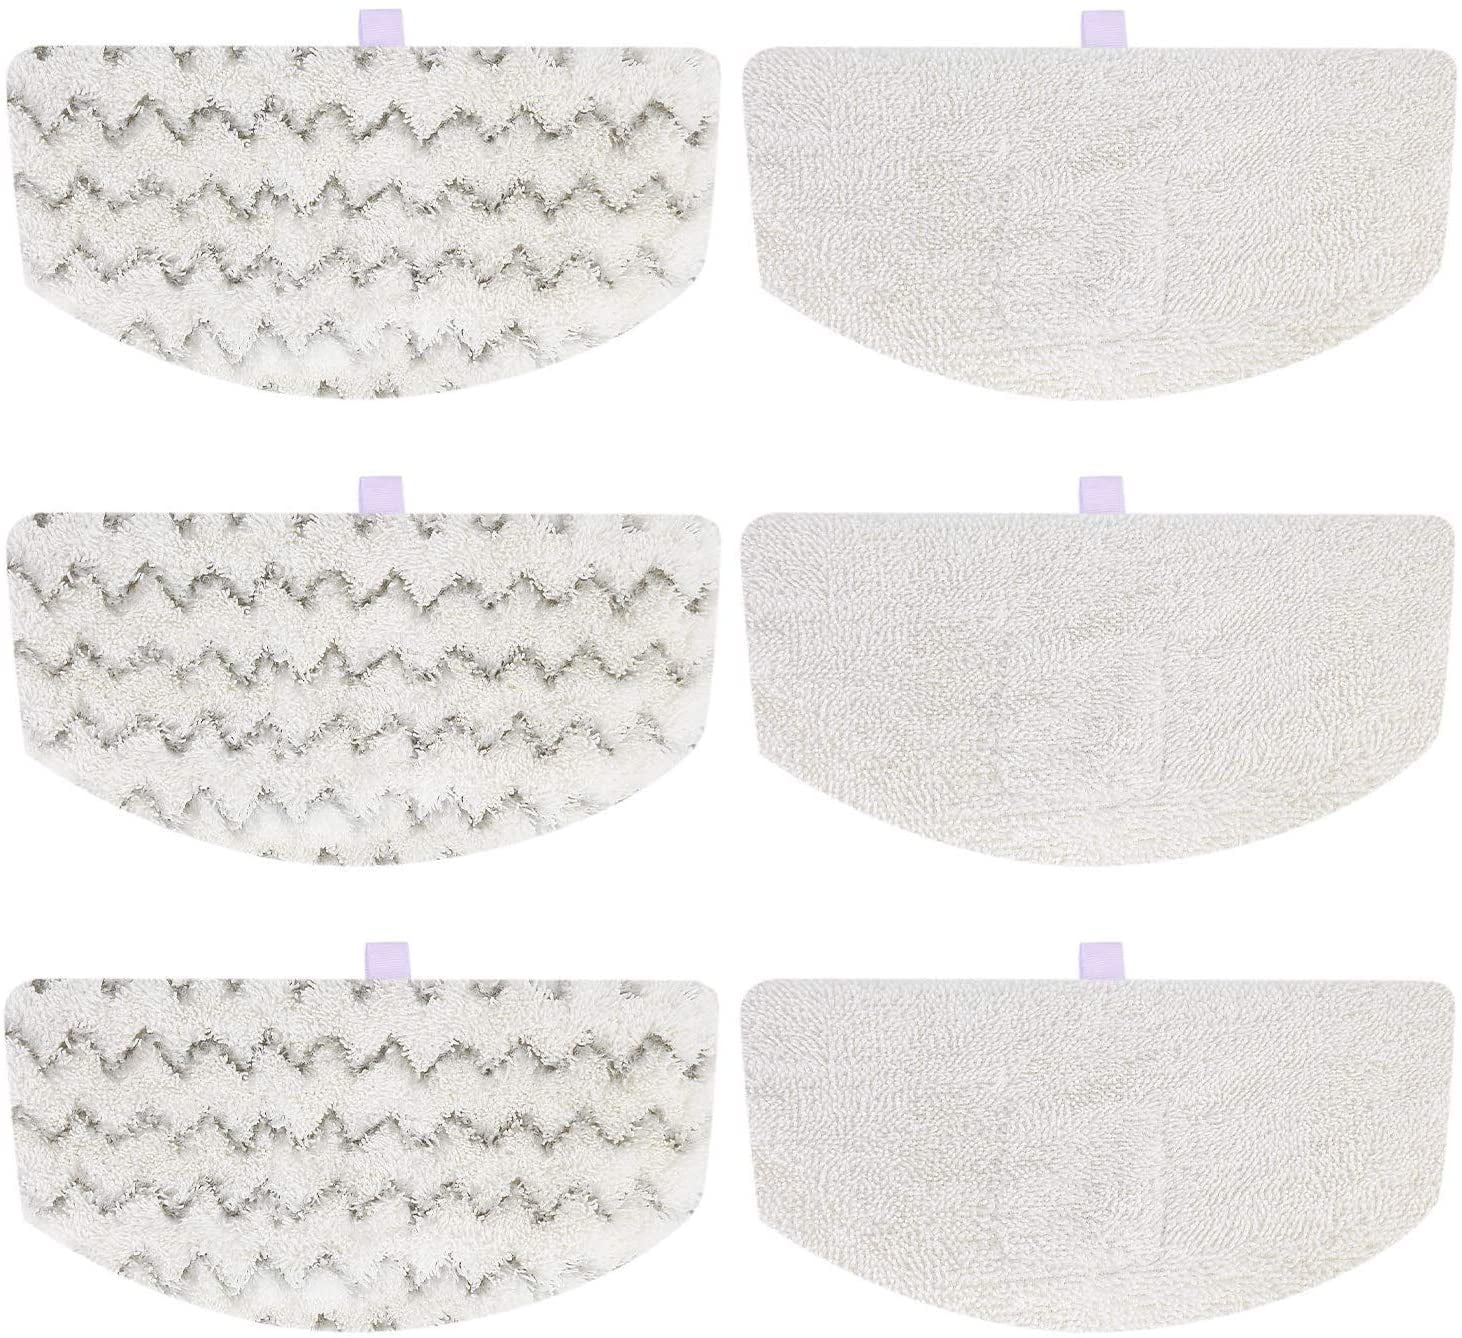 4 Steam Mop Pads fits Bissell PowerFresh Pad 1940 203-2633 19402 19404 19408